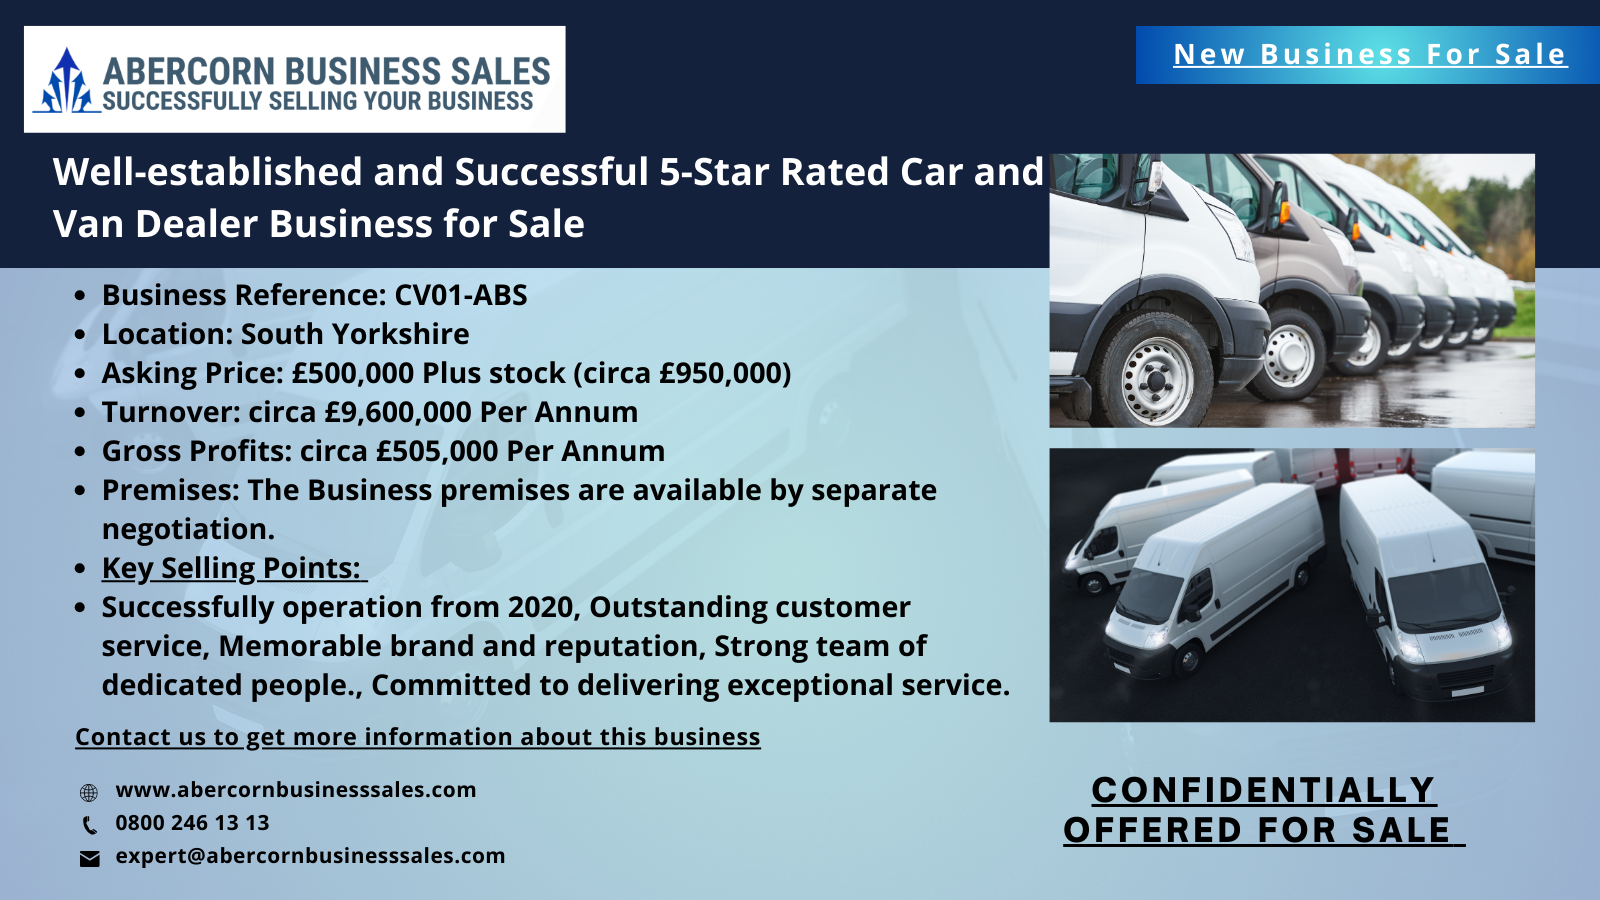 CV01-ABS - Well-established and Successful 5-Star Rated Car and Van Dealer Business for Sale